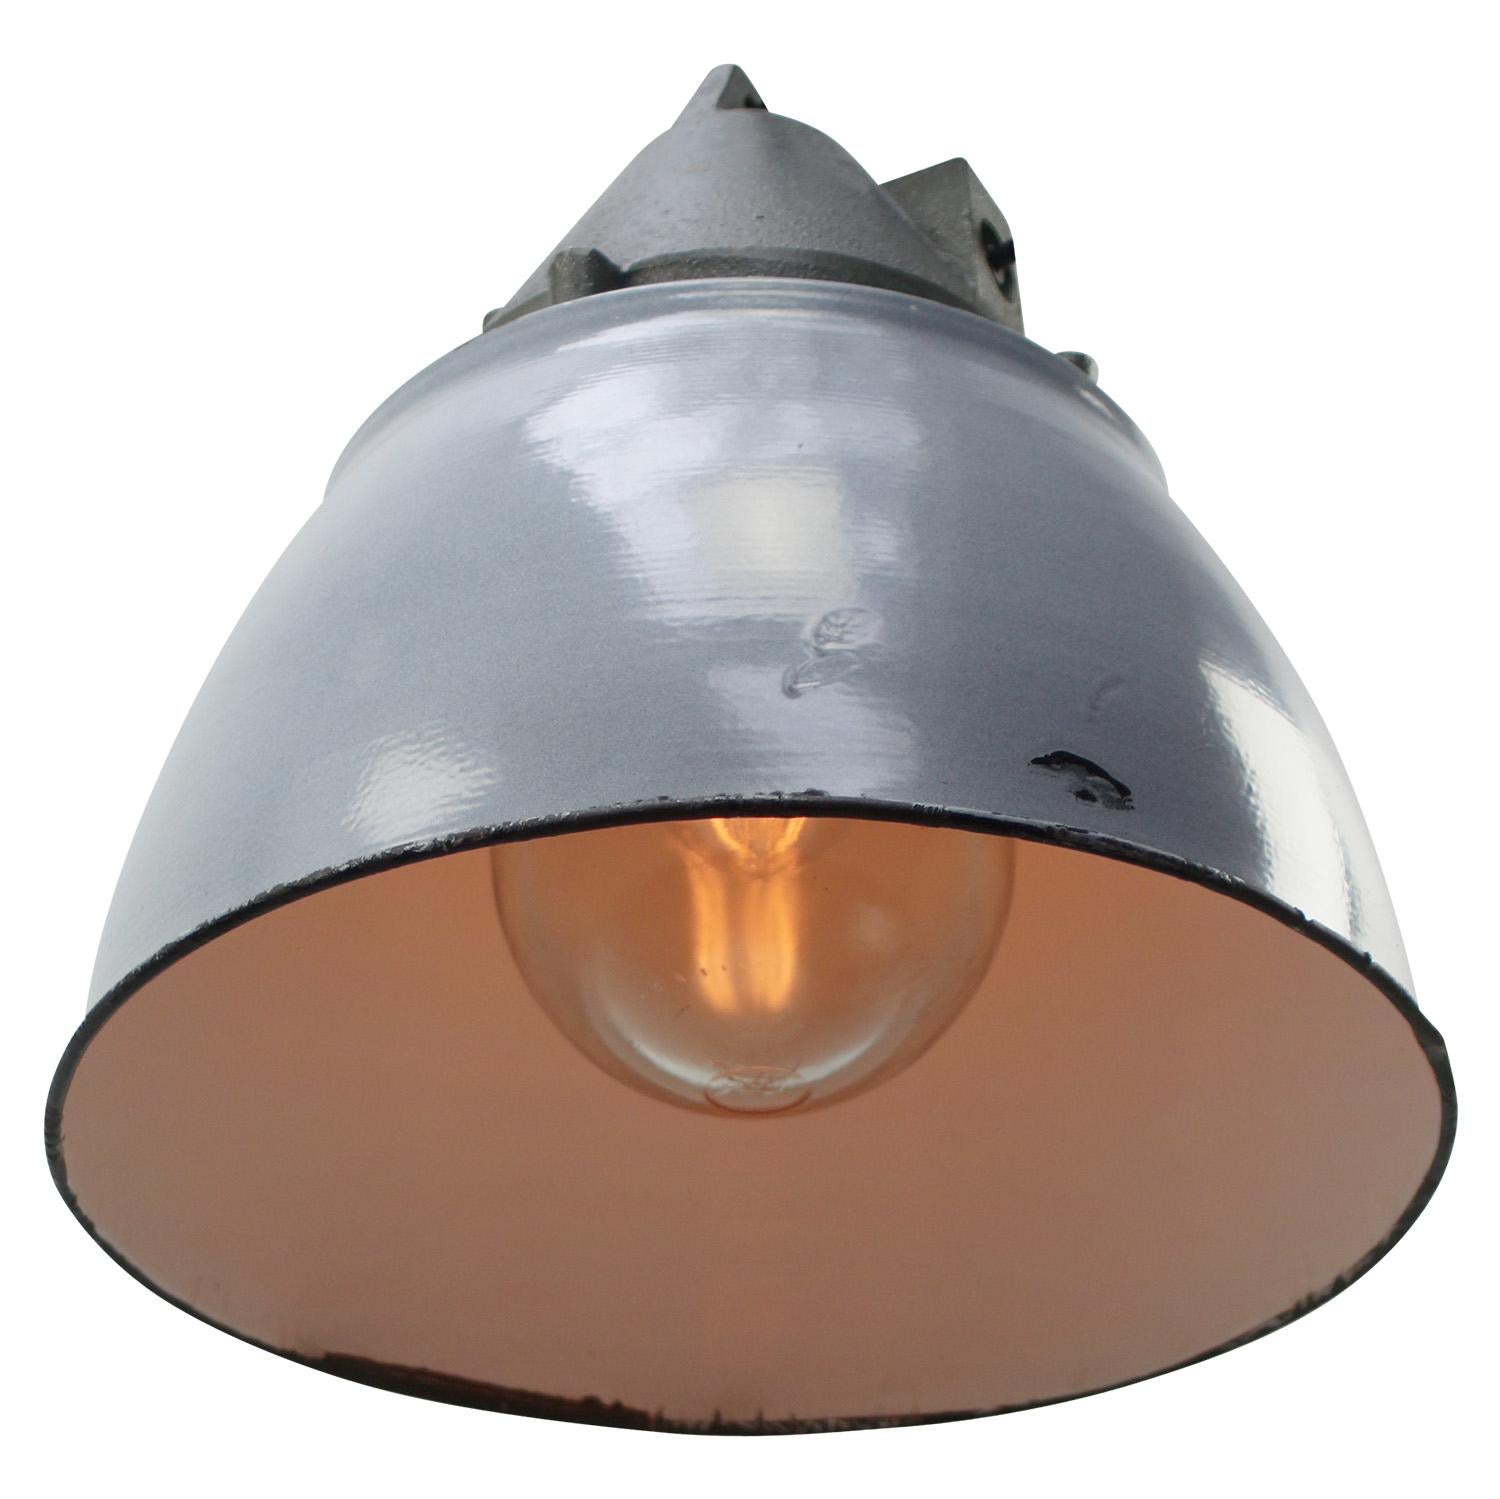 Gray enamel vintage industrial pendant light
Cast aluminium top with clear glass

Weight: 7.00 kg / 15.4 lb

Priced per individual item. All lamps have been made suitable by international standards for incandescent light bulbs, energy-efficient and